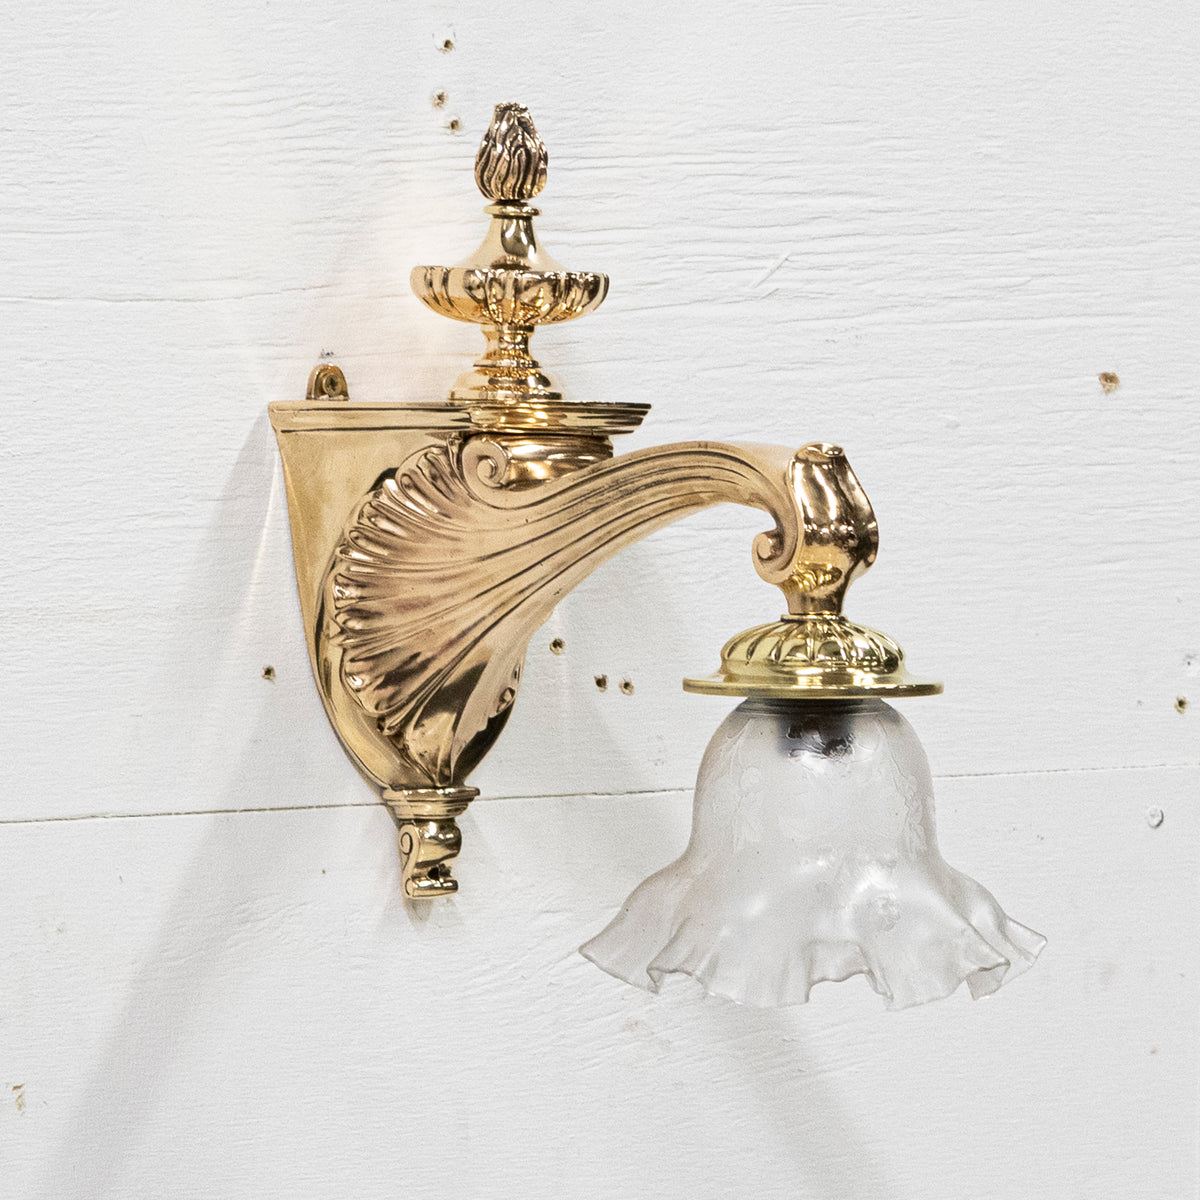 Pretty Pair of Mid-Century Rose Brass Wall Lights | The Architectural Forum